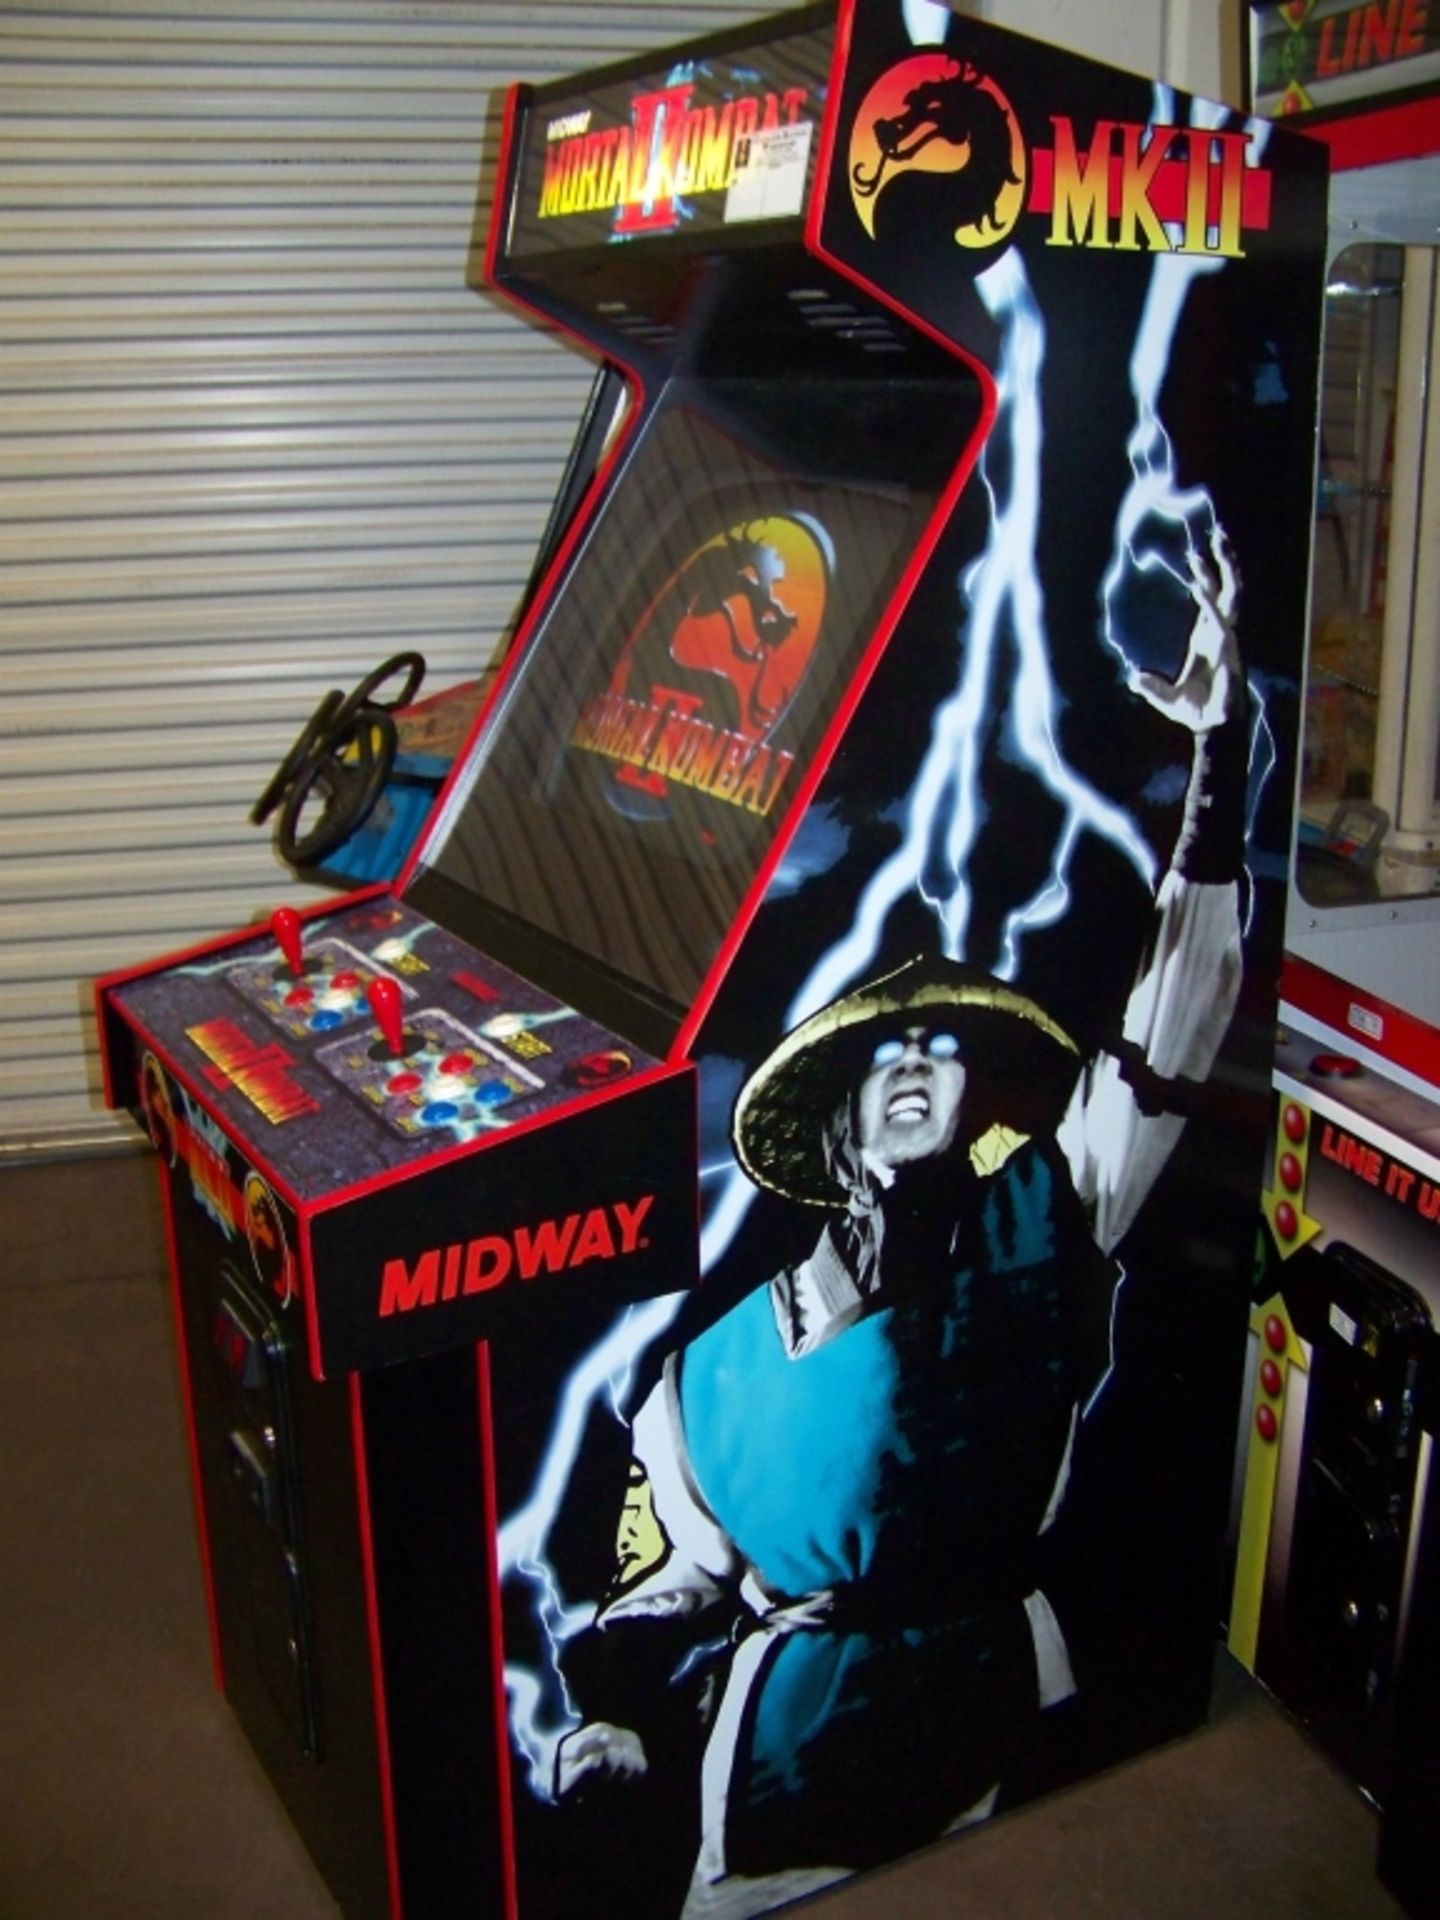 MORTAL KOMBAT II ARCADE GAME MIDWAY Item is in used condition. Evidence of wear and commercial - Image 5 of 8